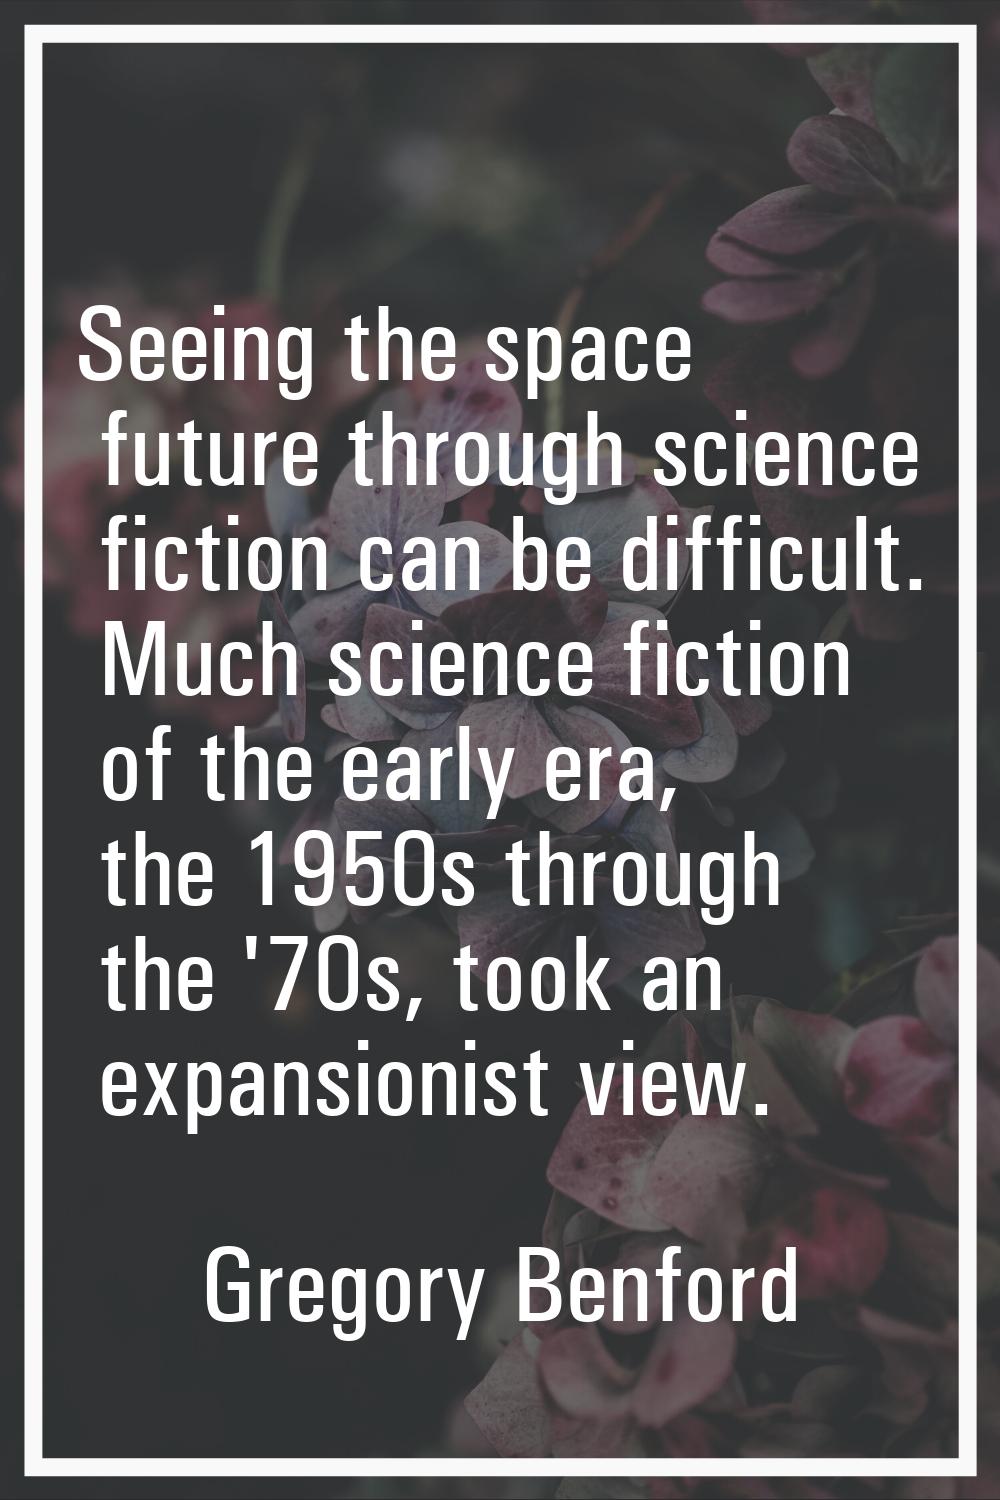 Seeing the space future through science fiction can be difficult. Much science fiction of the early